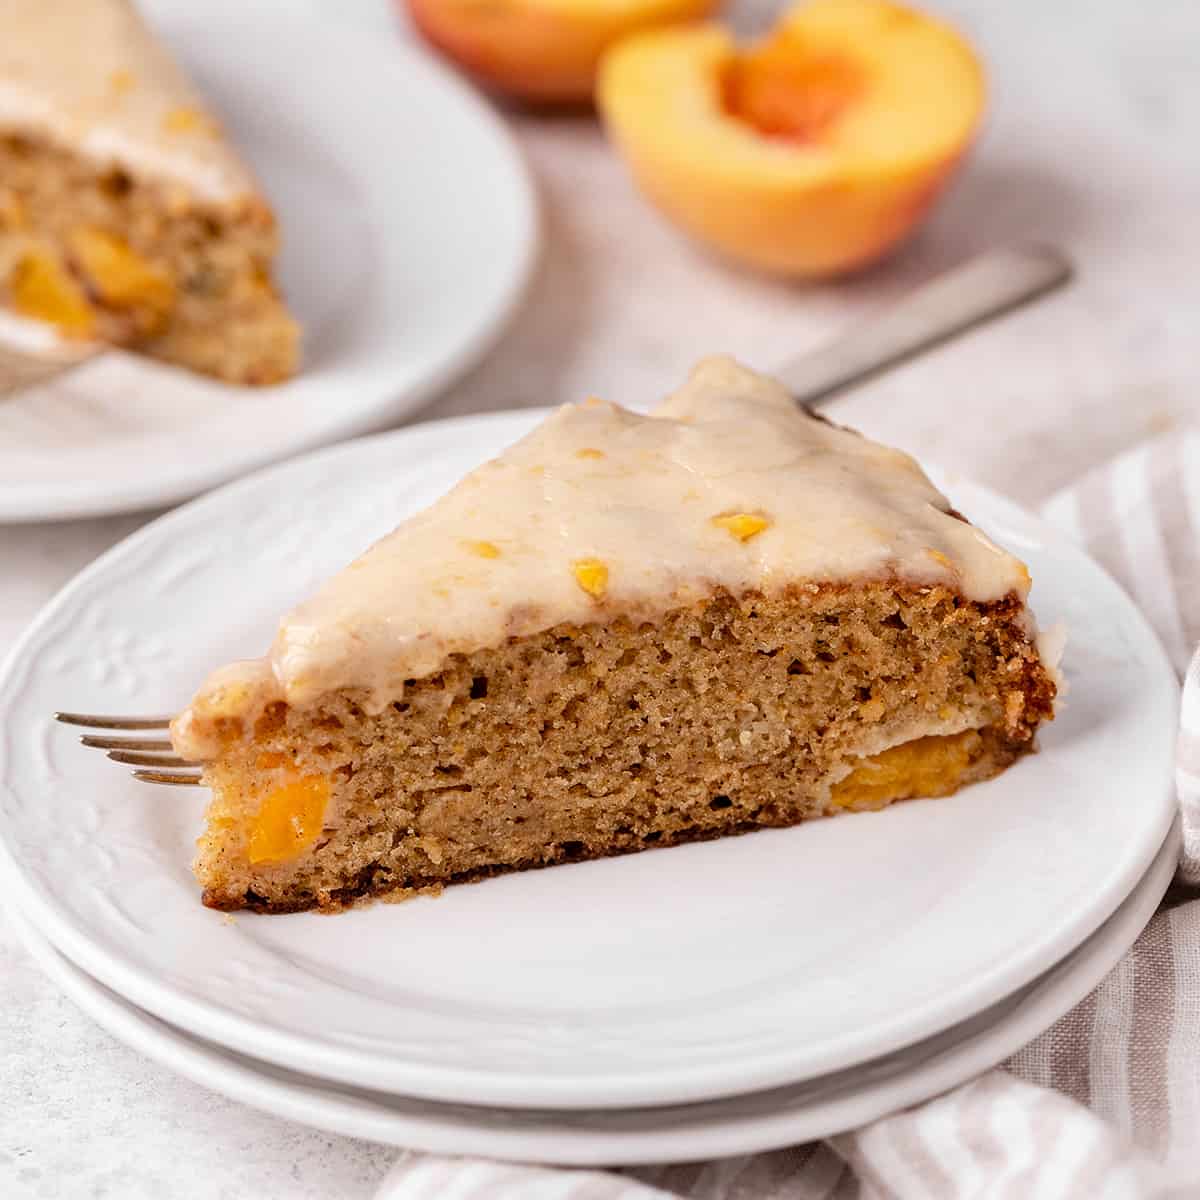 a slice of peach cake on a plate with a fork